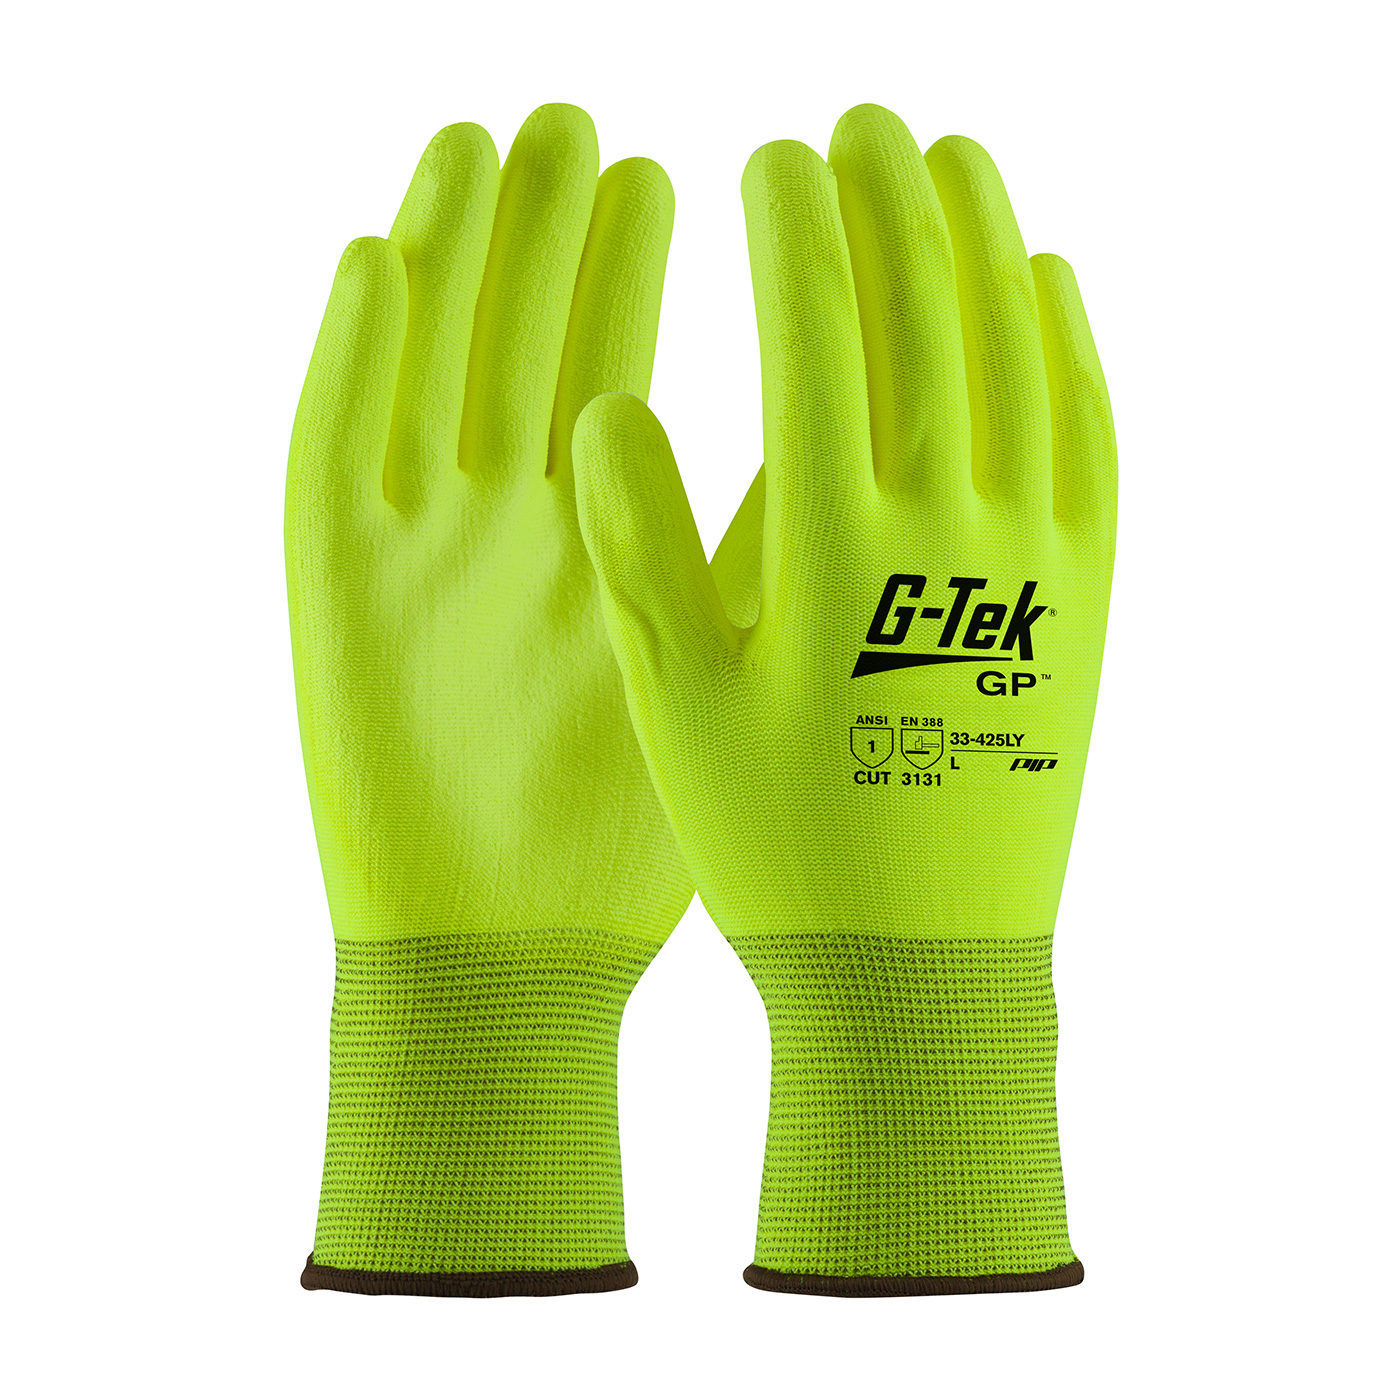 PIP 33-425LY/M G-Tek GP Hi-Vis Seamless Knit Polyester Glove with Polyurethane Coated Smooth Grip on Palm & Fingers - Medium PID-33 425LY M